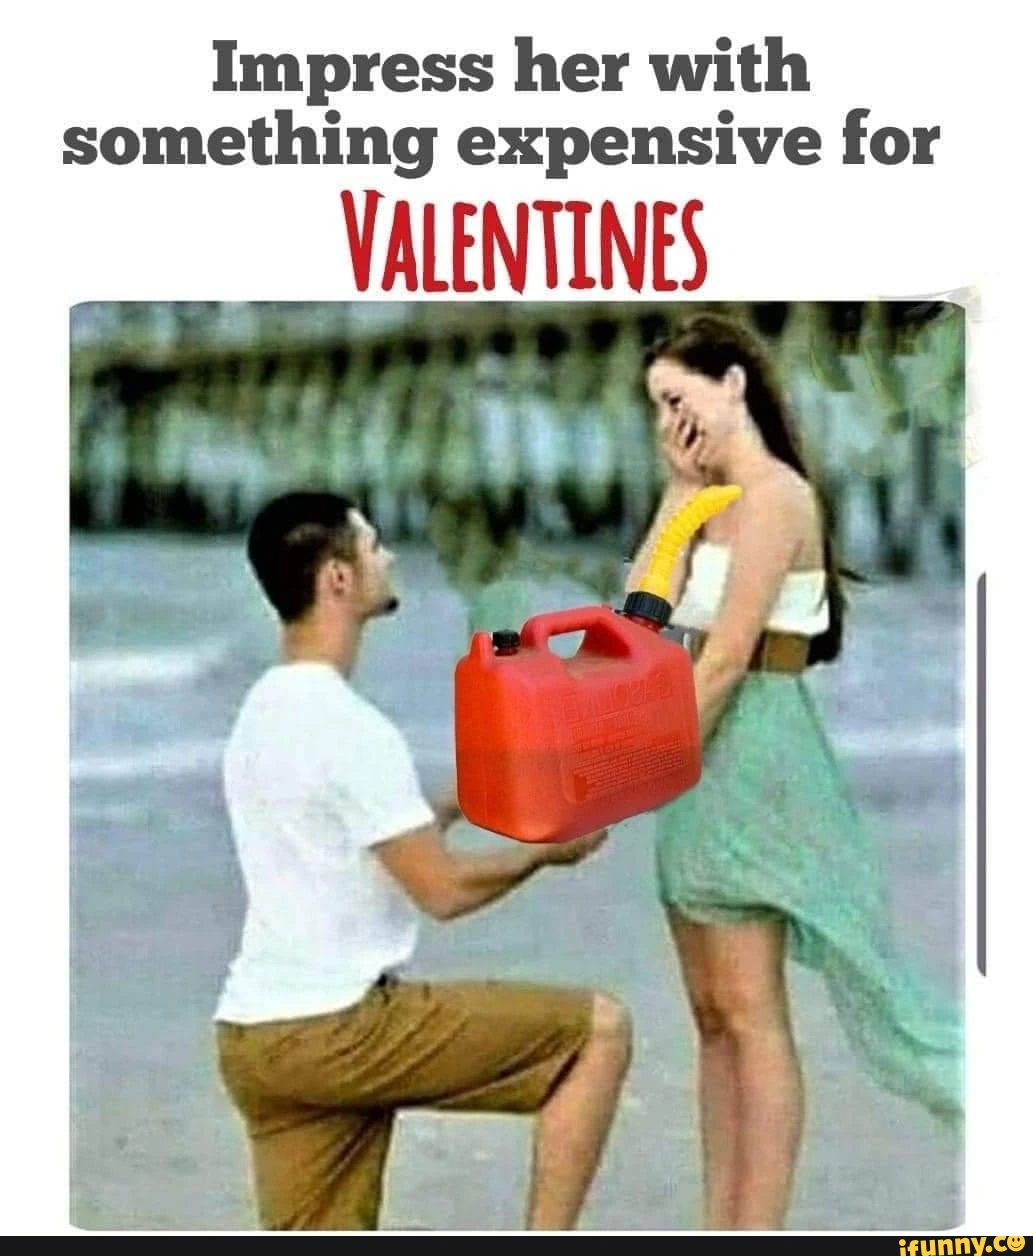 Impress her with something expensive for VALENTINES